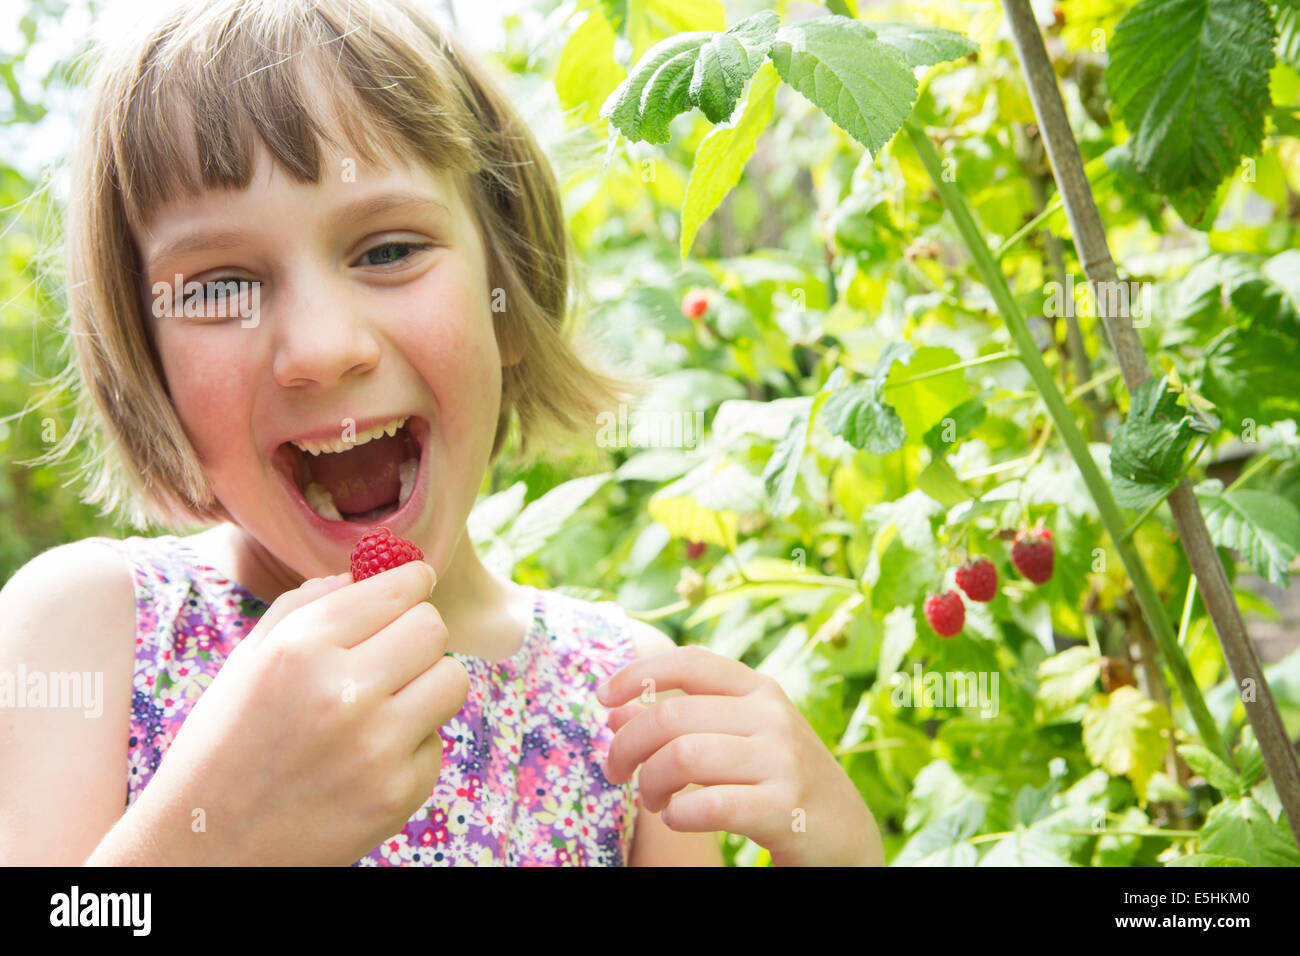 Young Girl Eating Raspberries From The Garden Stock Photo